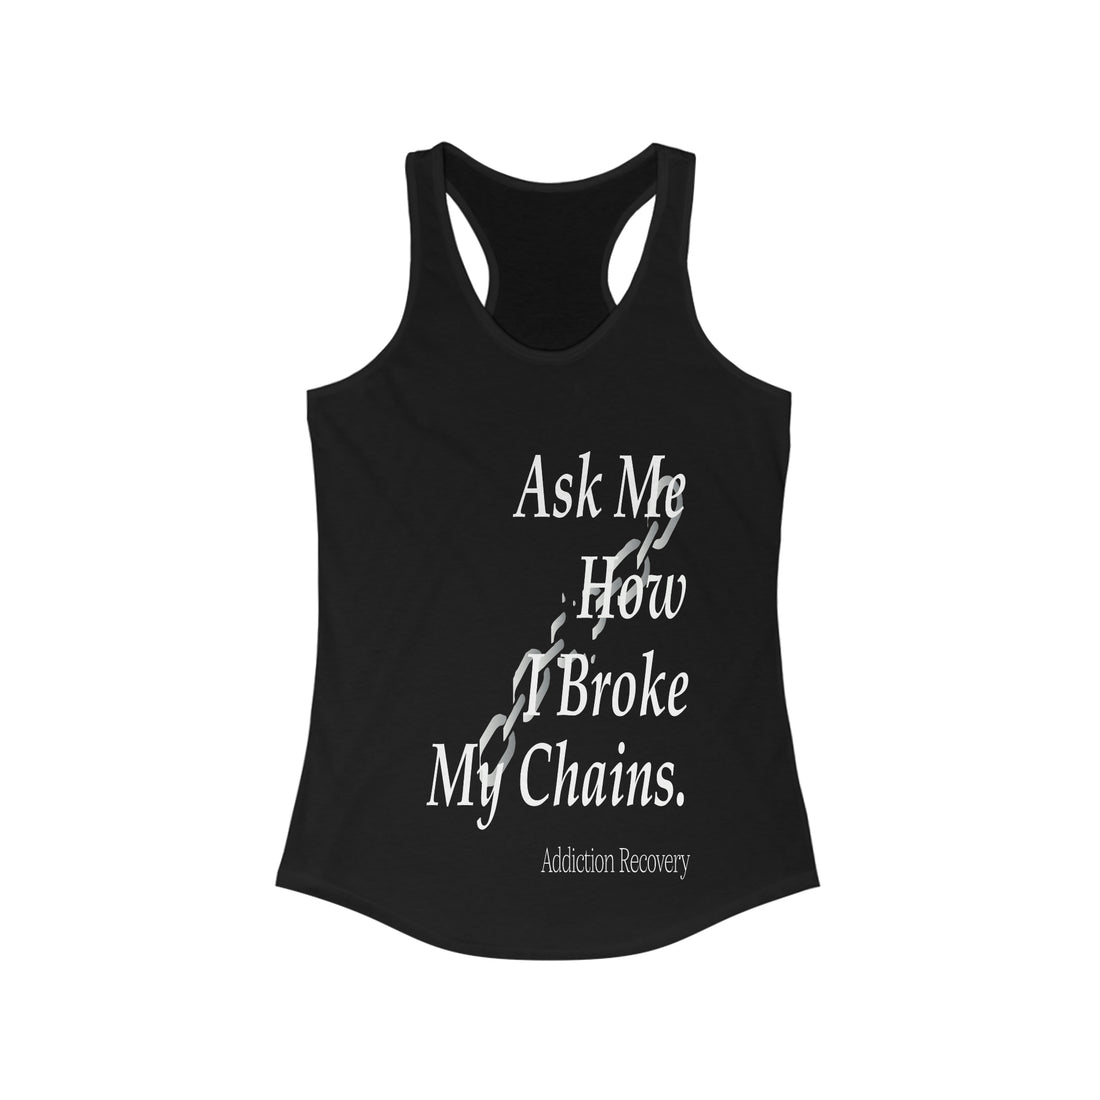 Ask Me How I Broke My Chains - Racerback Tank Top